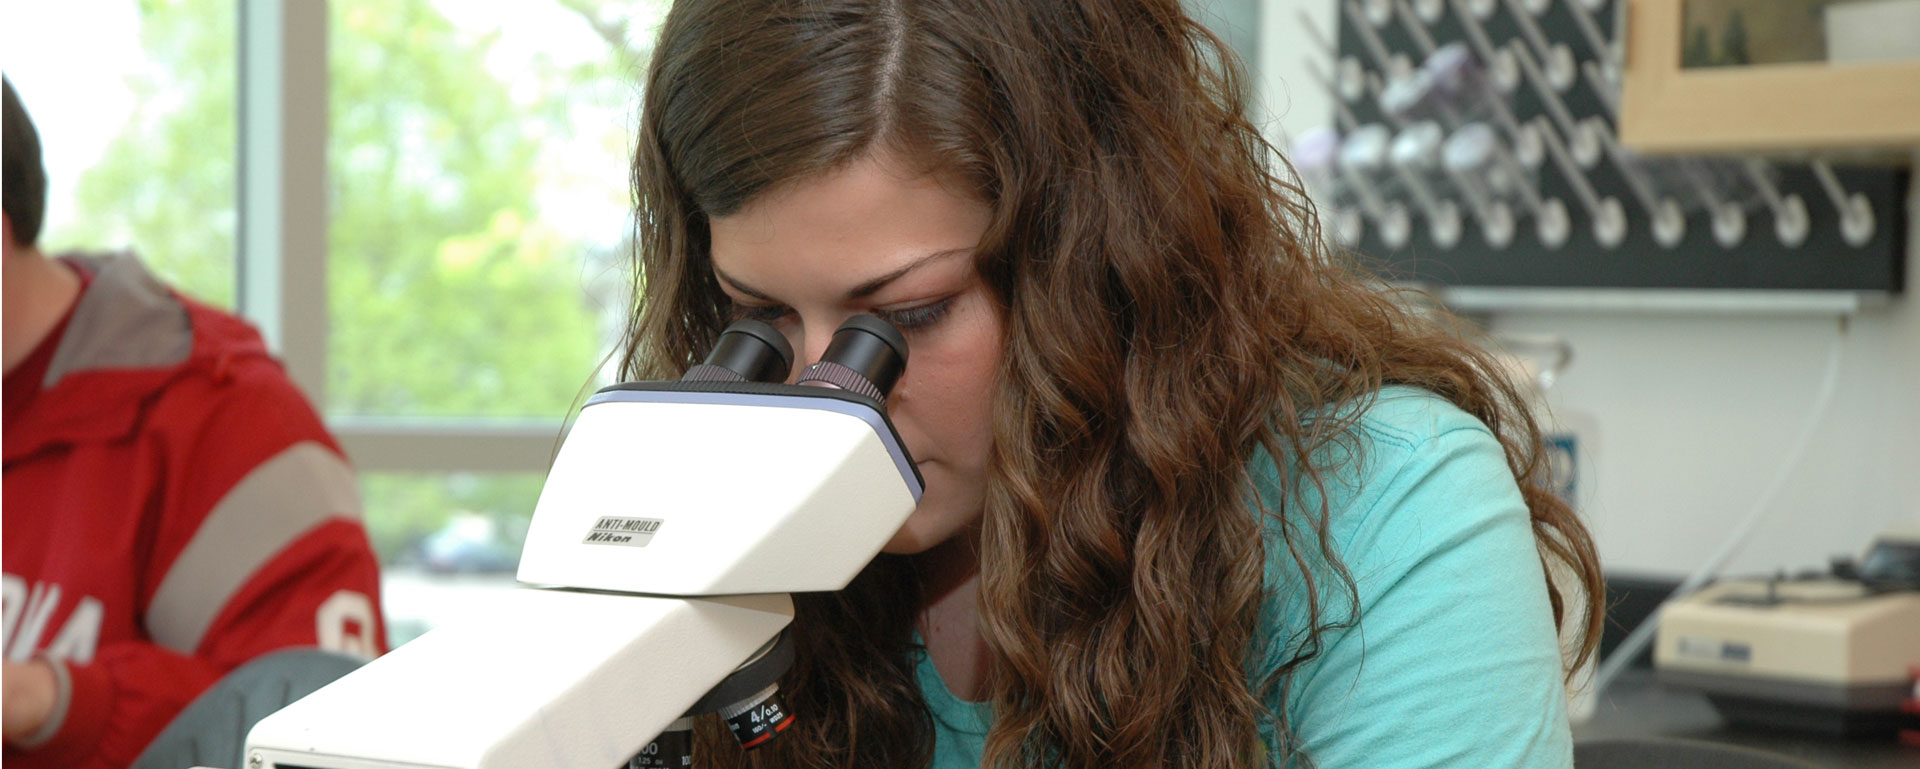 Student using a microscope in biology class.